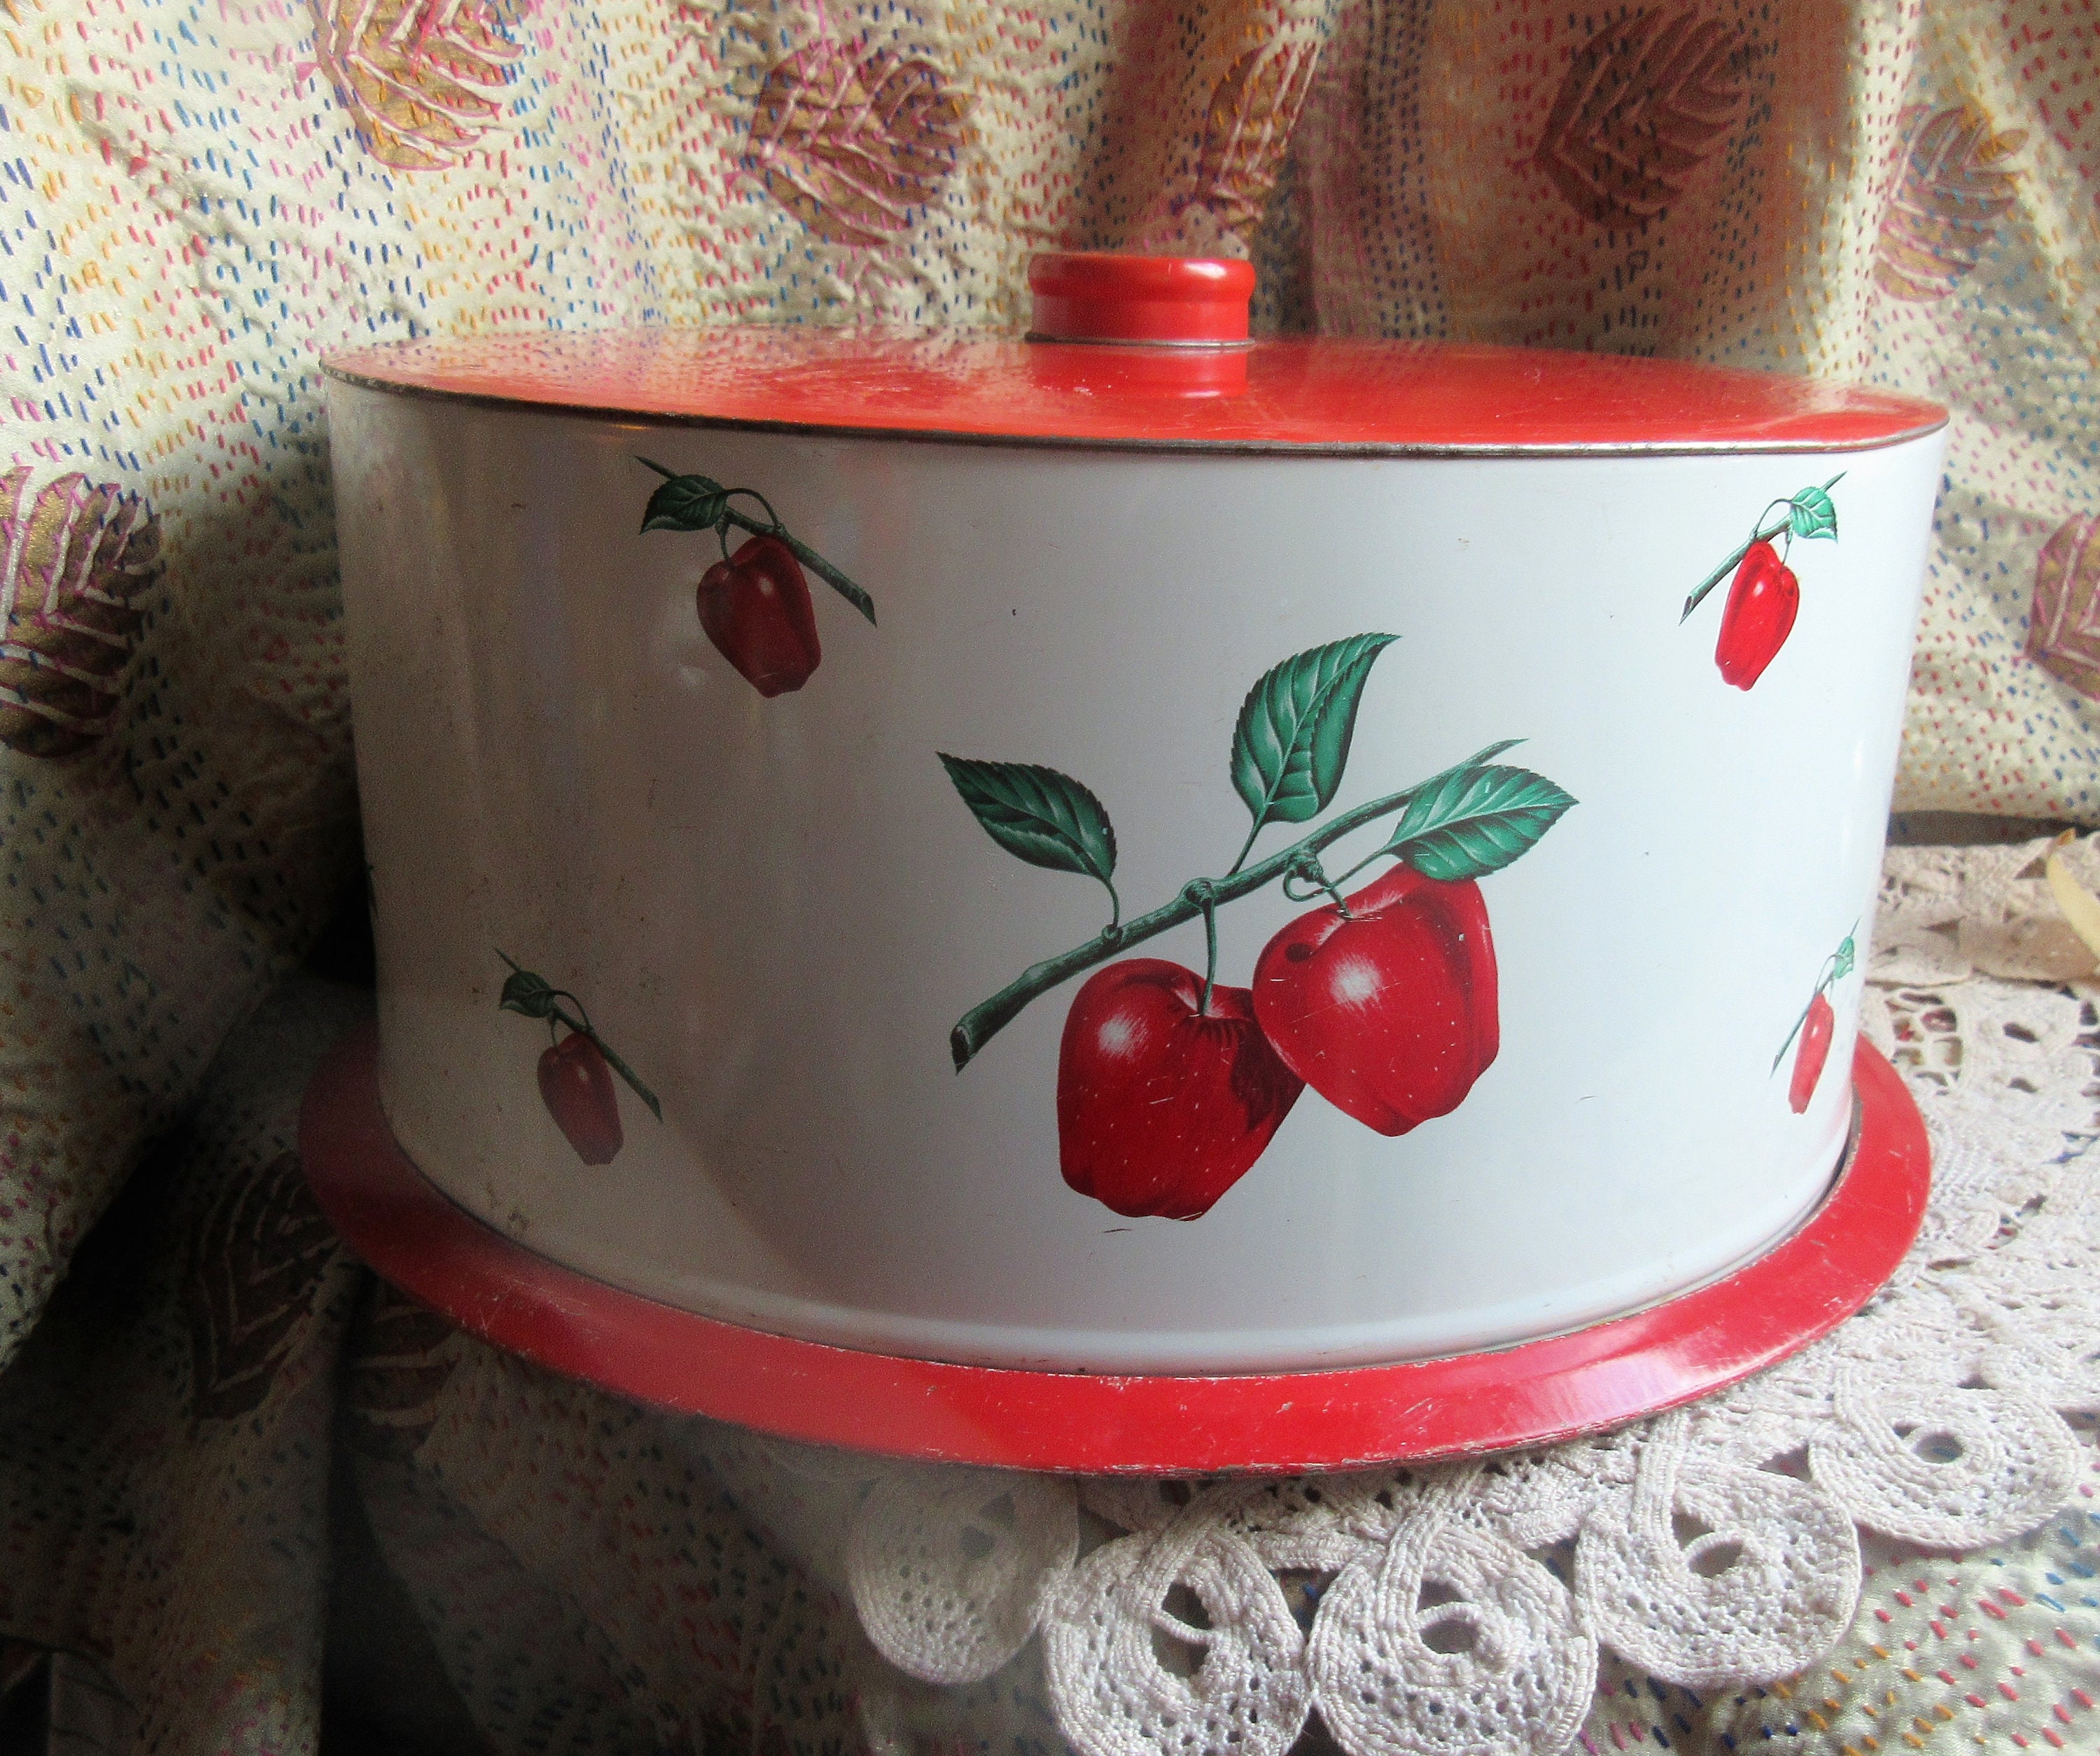 Antique Kitchen 12 Metal Cake Carrier Pan White w/Red Flowers Handle -  antiques - by owner - collectibles sale 